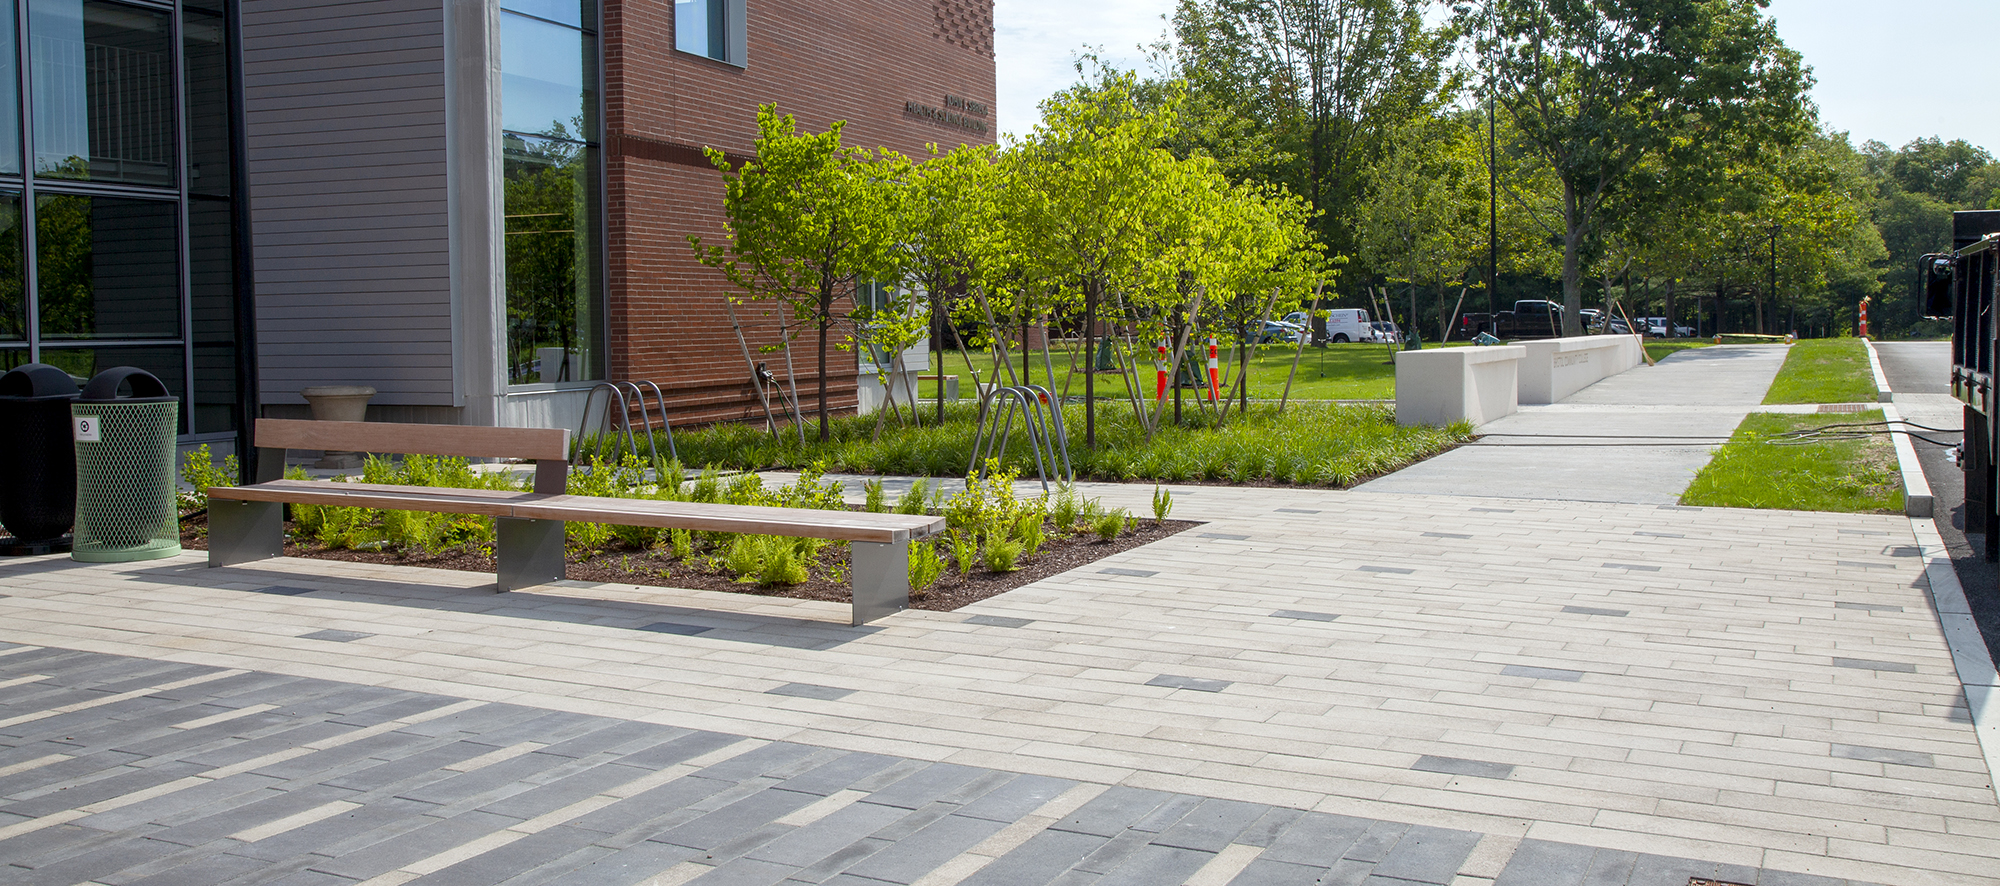 Bristol Community College has entrances paved with Promenade Plank Pavers, in block and dash patterns in contrasting colors.